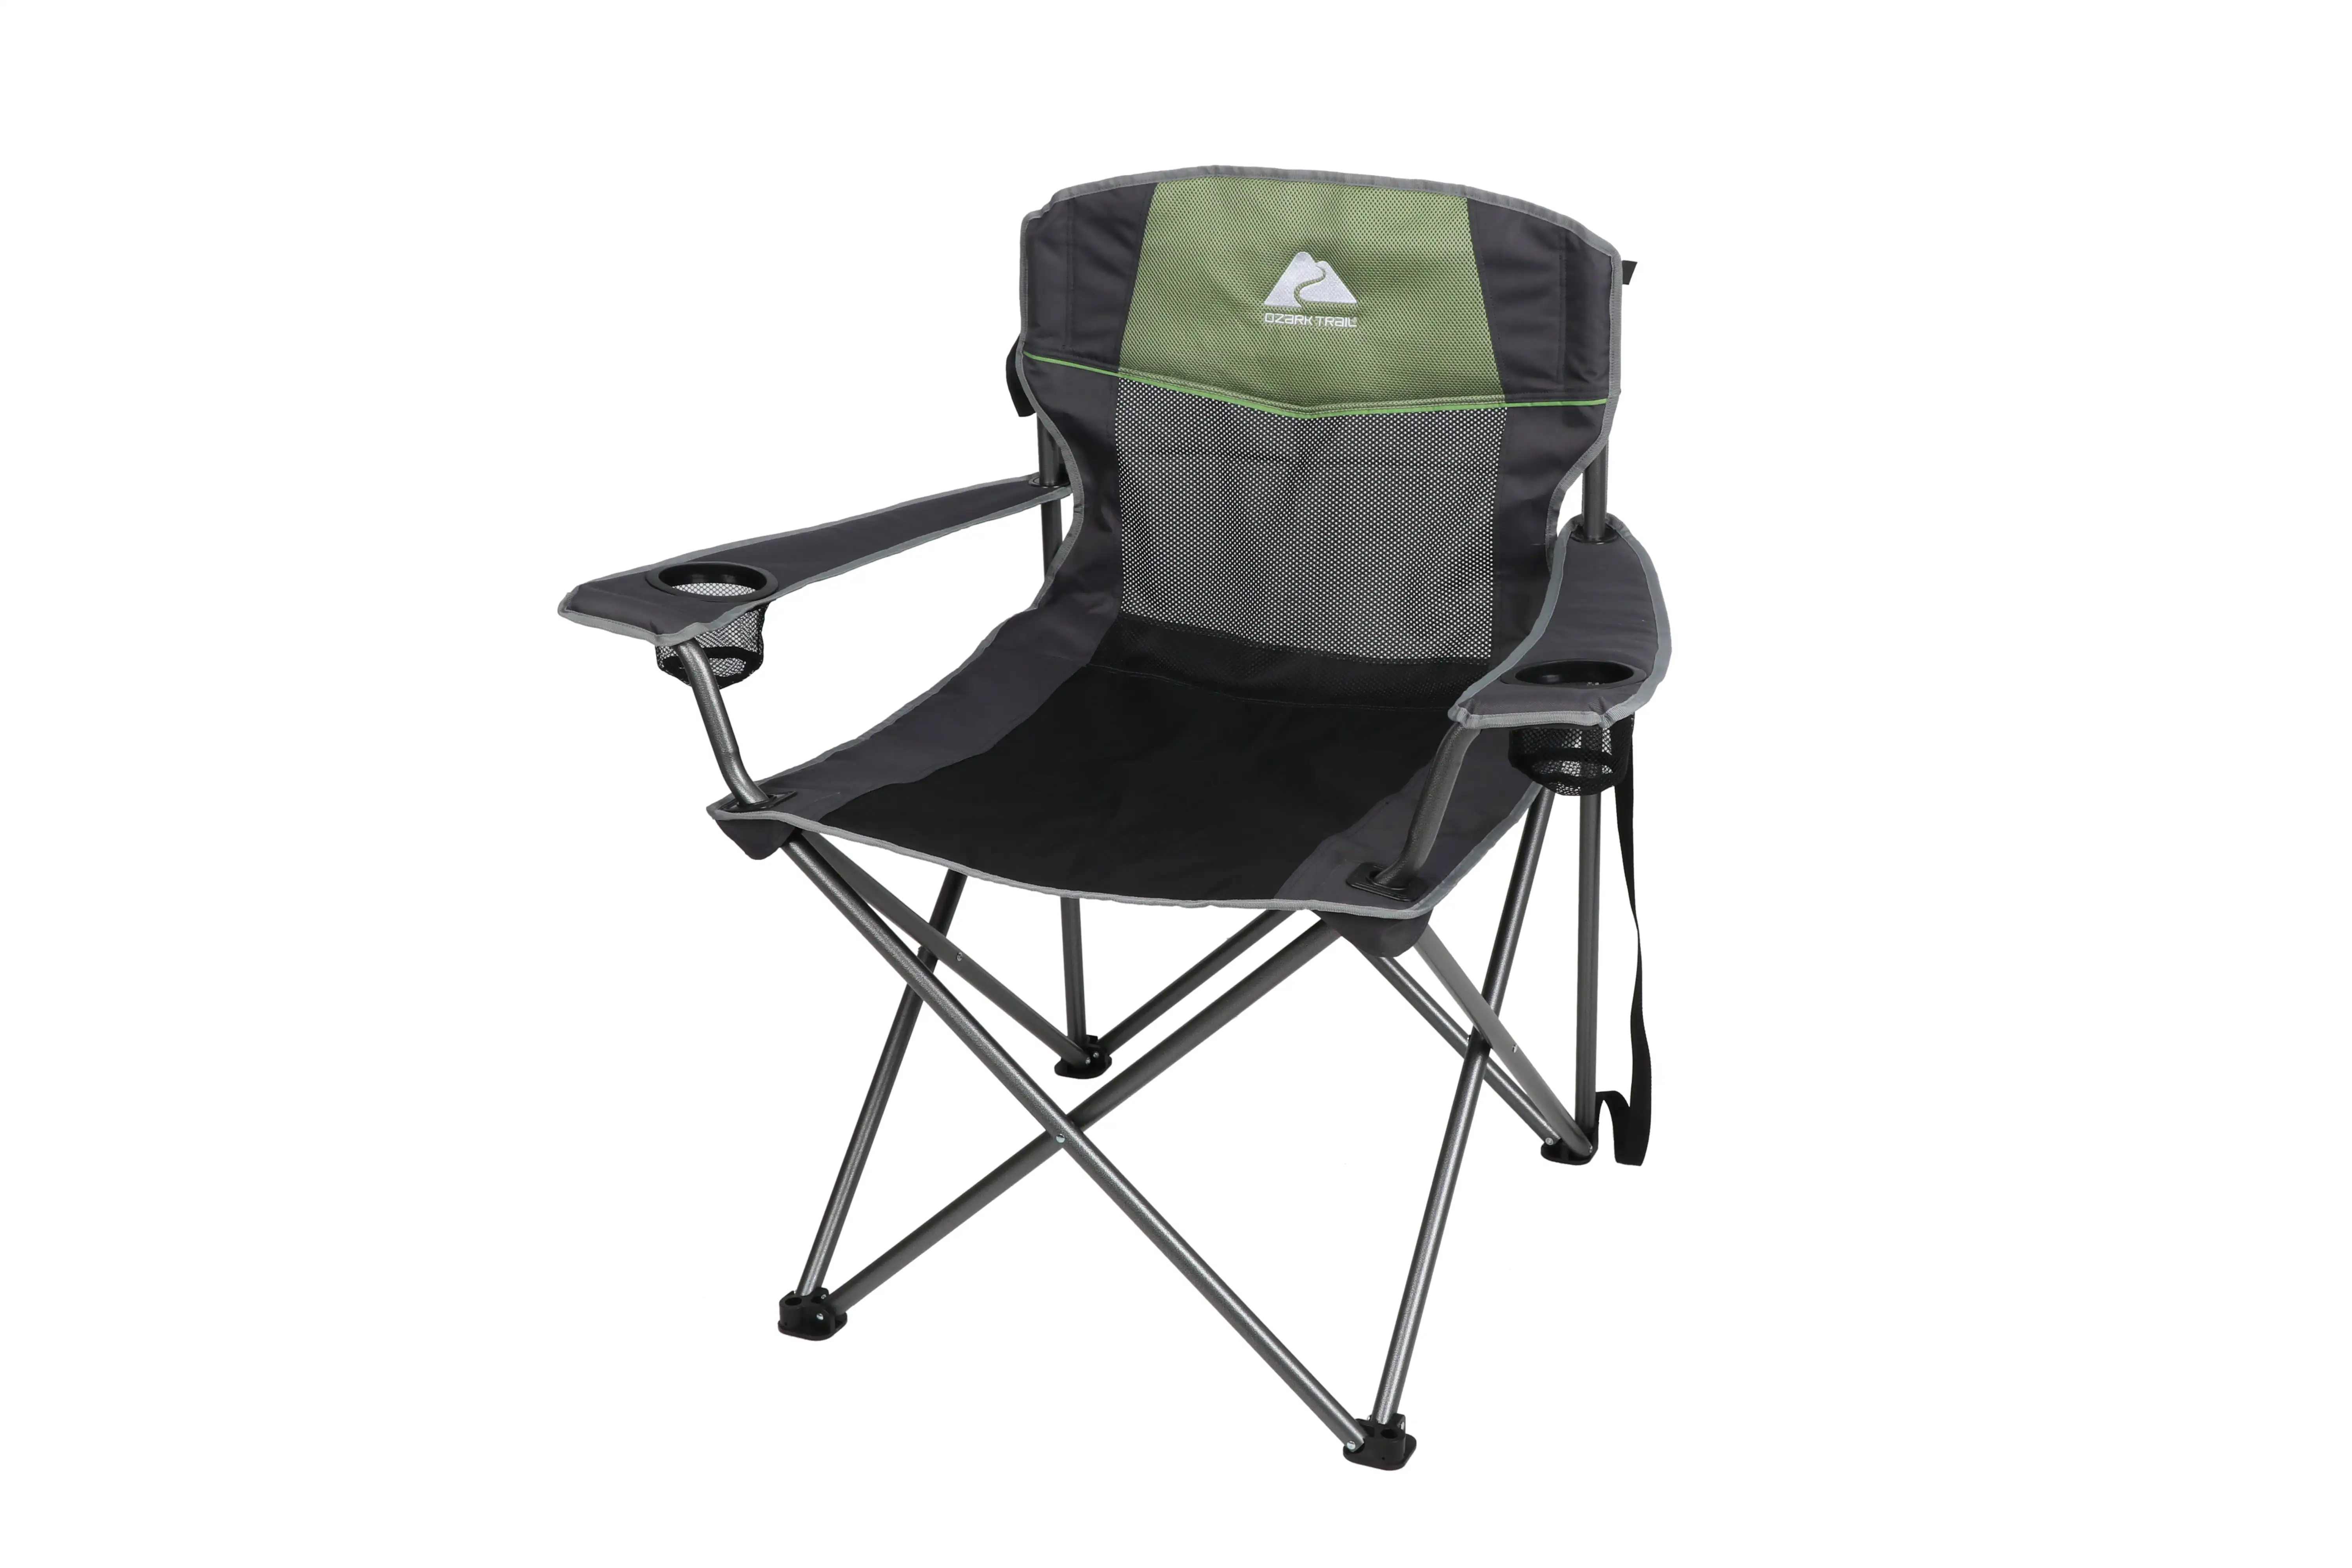 

Ozark Trail Big and Tall Chair with Cup Holders, Green for Outdoor, Adult, Weighs 10lbs